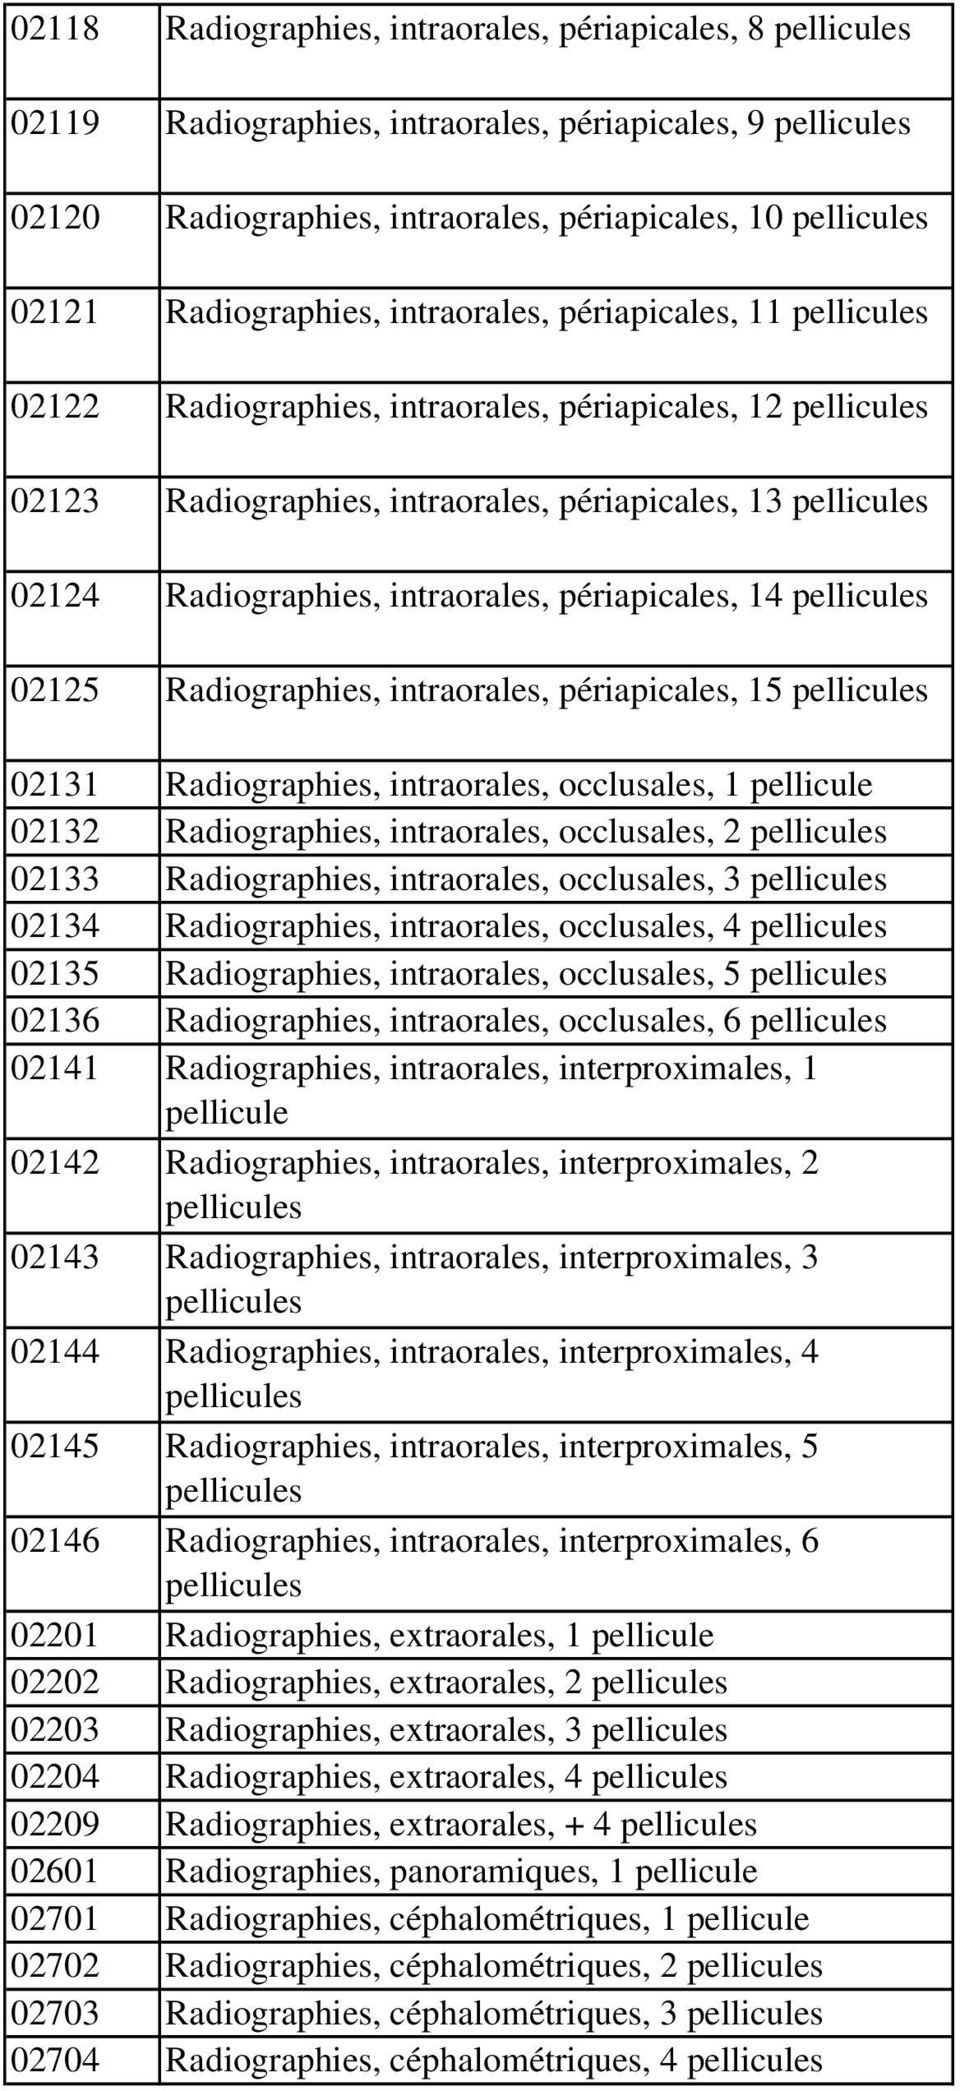 Radiographies, intraorales, périapicales, 14 pellicules 02125 Radiographies, intraorales, périapicales, 15 pellicules 02131 Radiographies, intraorales, occlusales, 1 pellicule 02132 Radiographies,